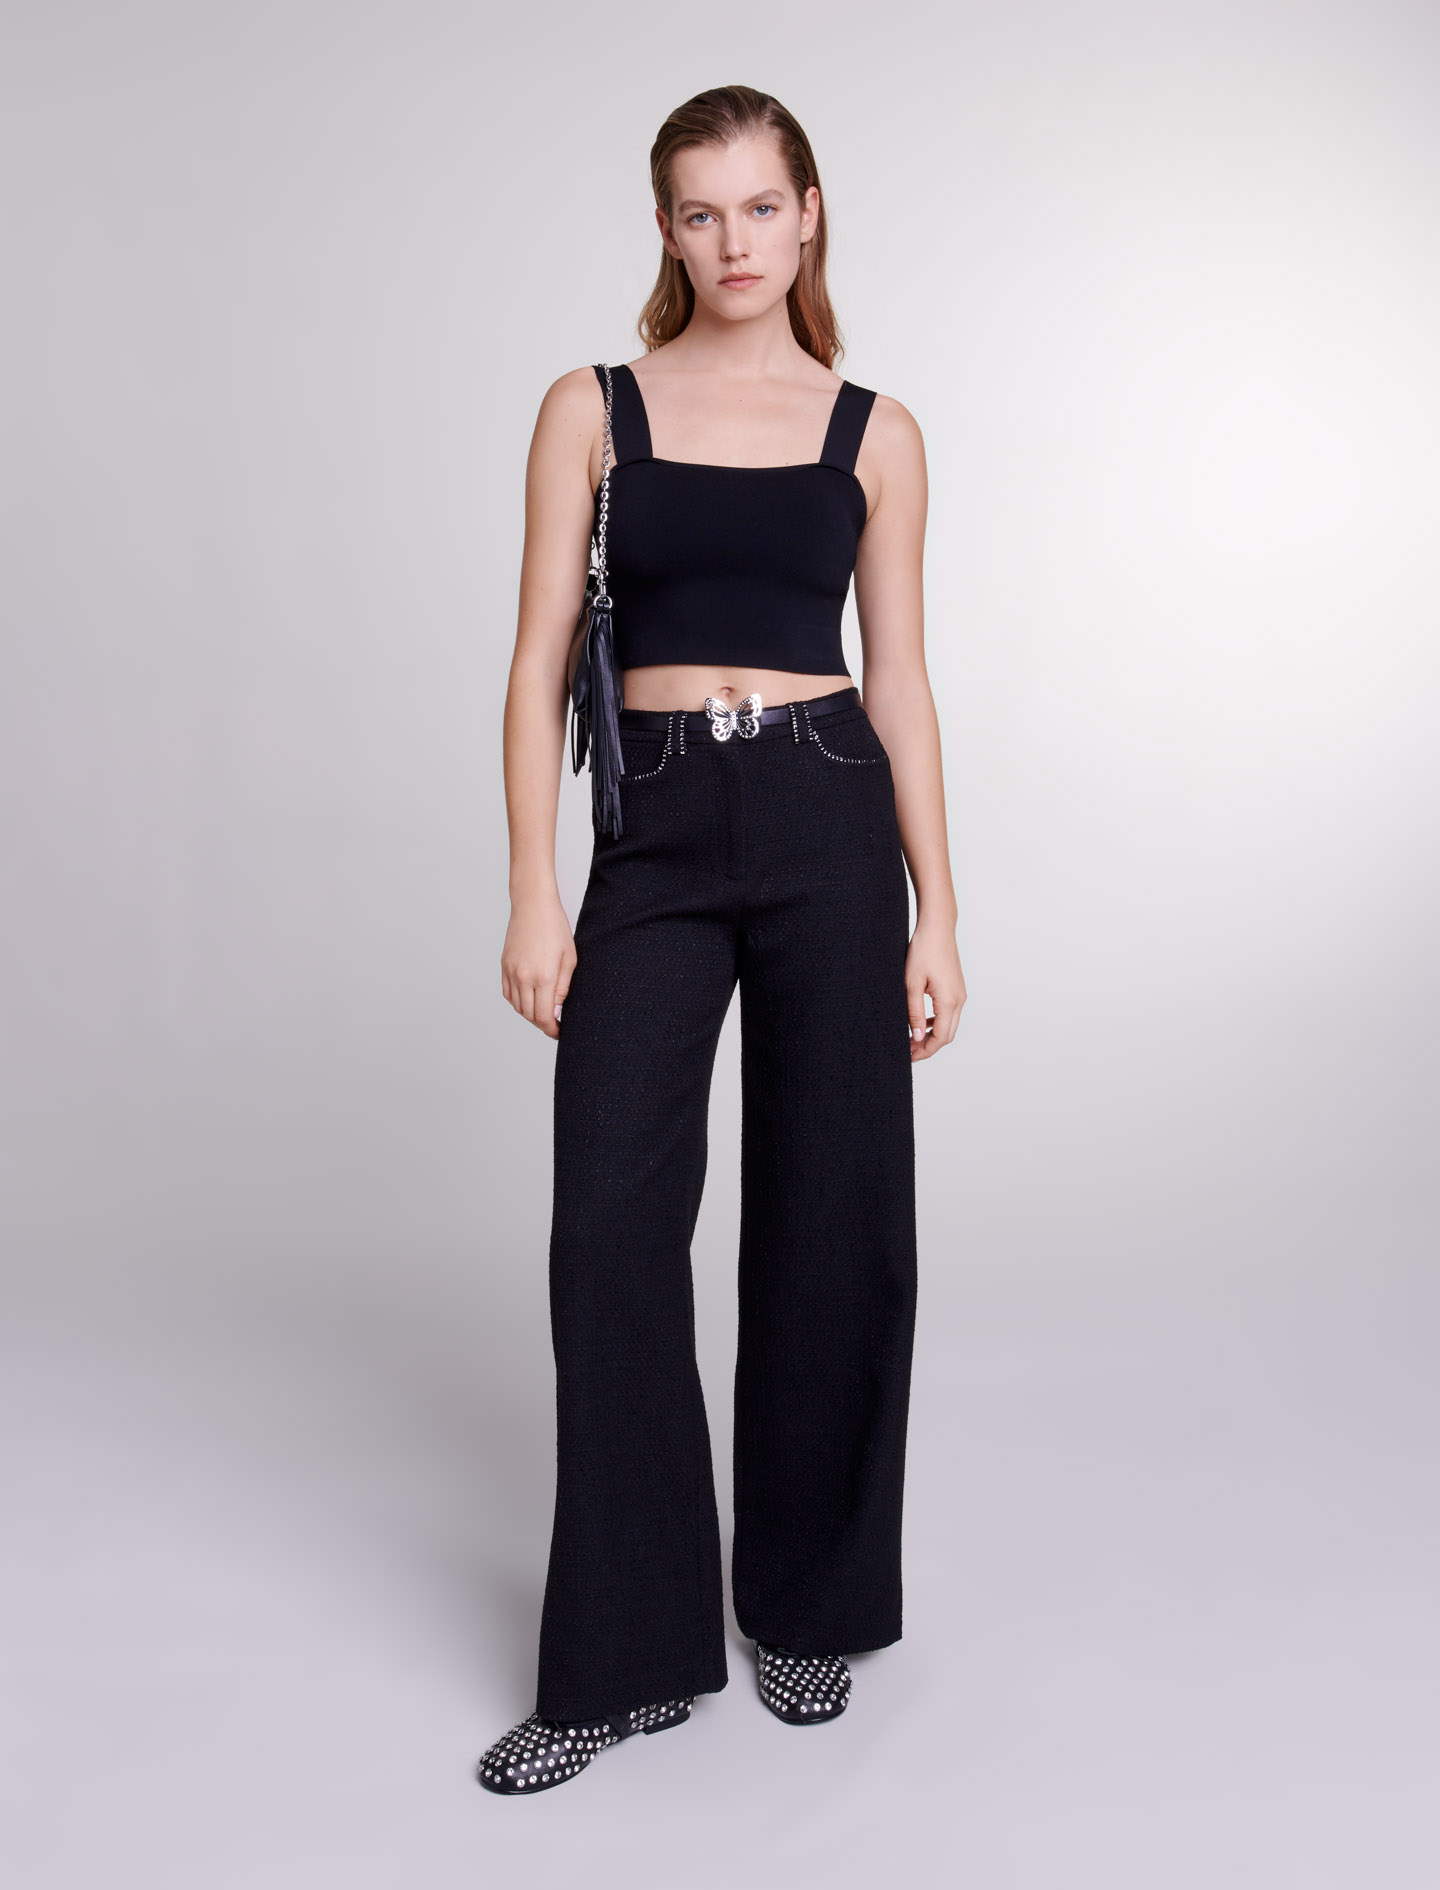 Maje Woman's polyester Belt lining: Wide-leg tweed trousers for Spring/Summer, in color Black / Black